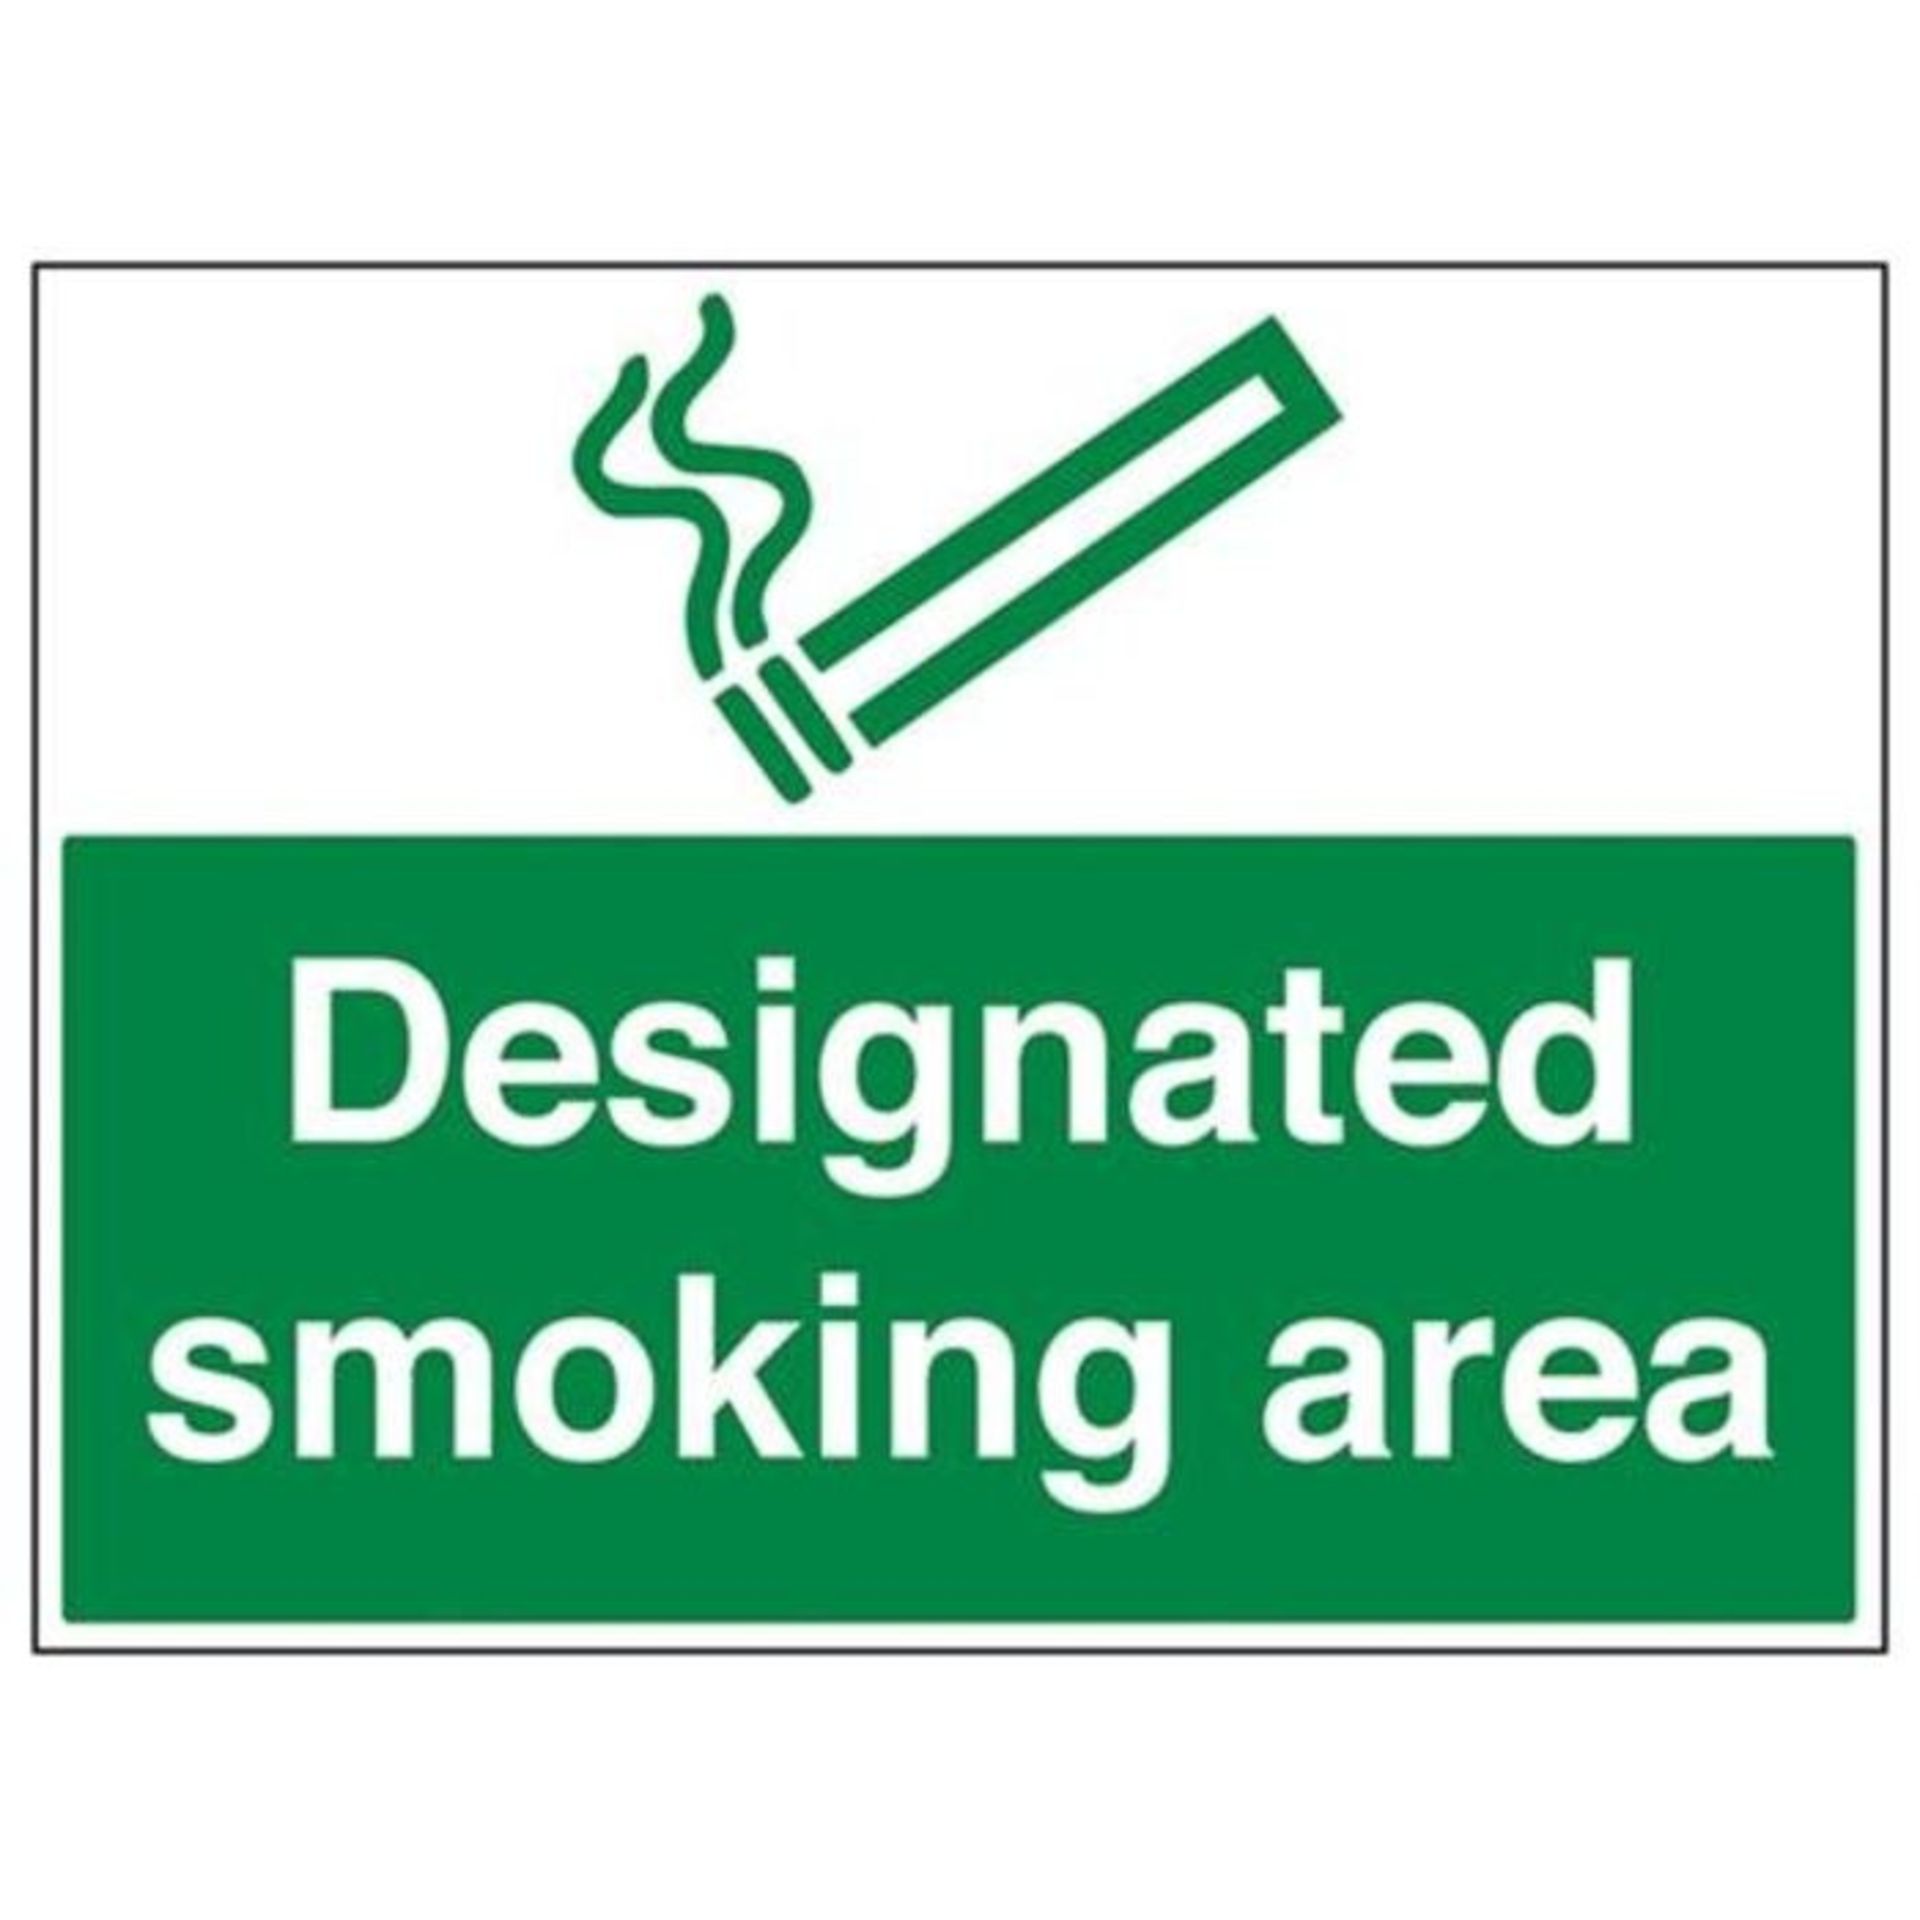 VSafety Designated Smoking Area Prohibition Sign - Landscape - 600mm x 450mm - Self Ad